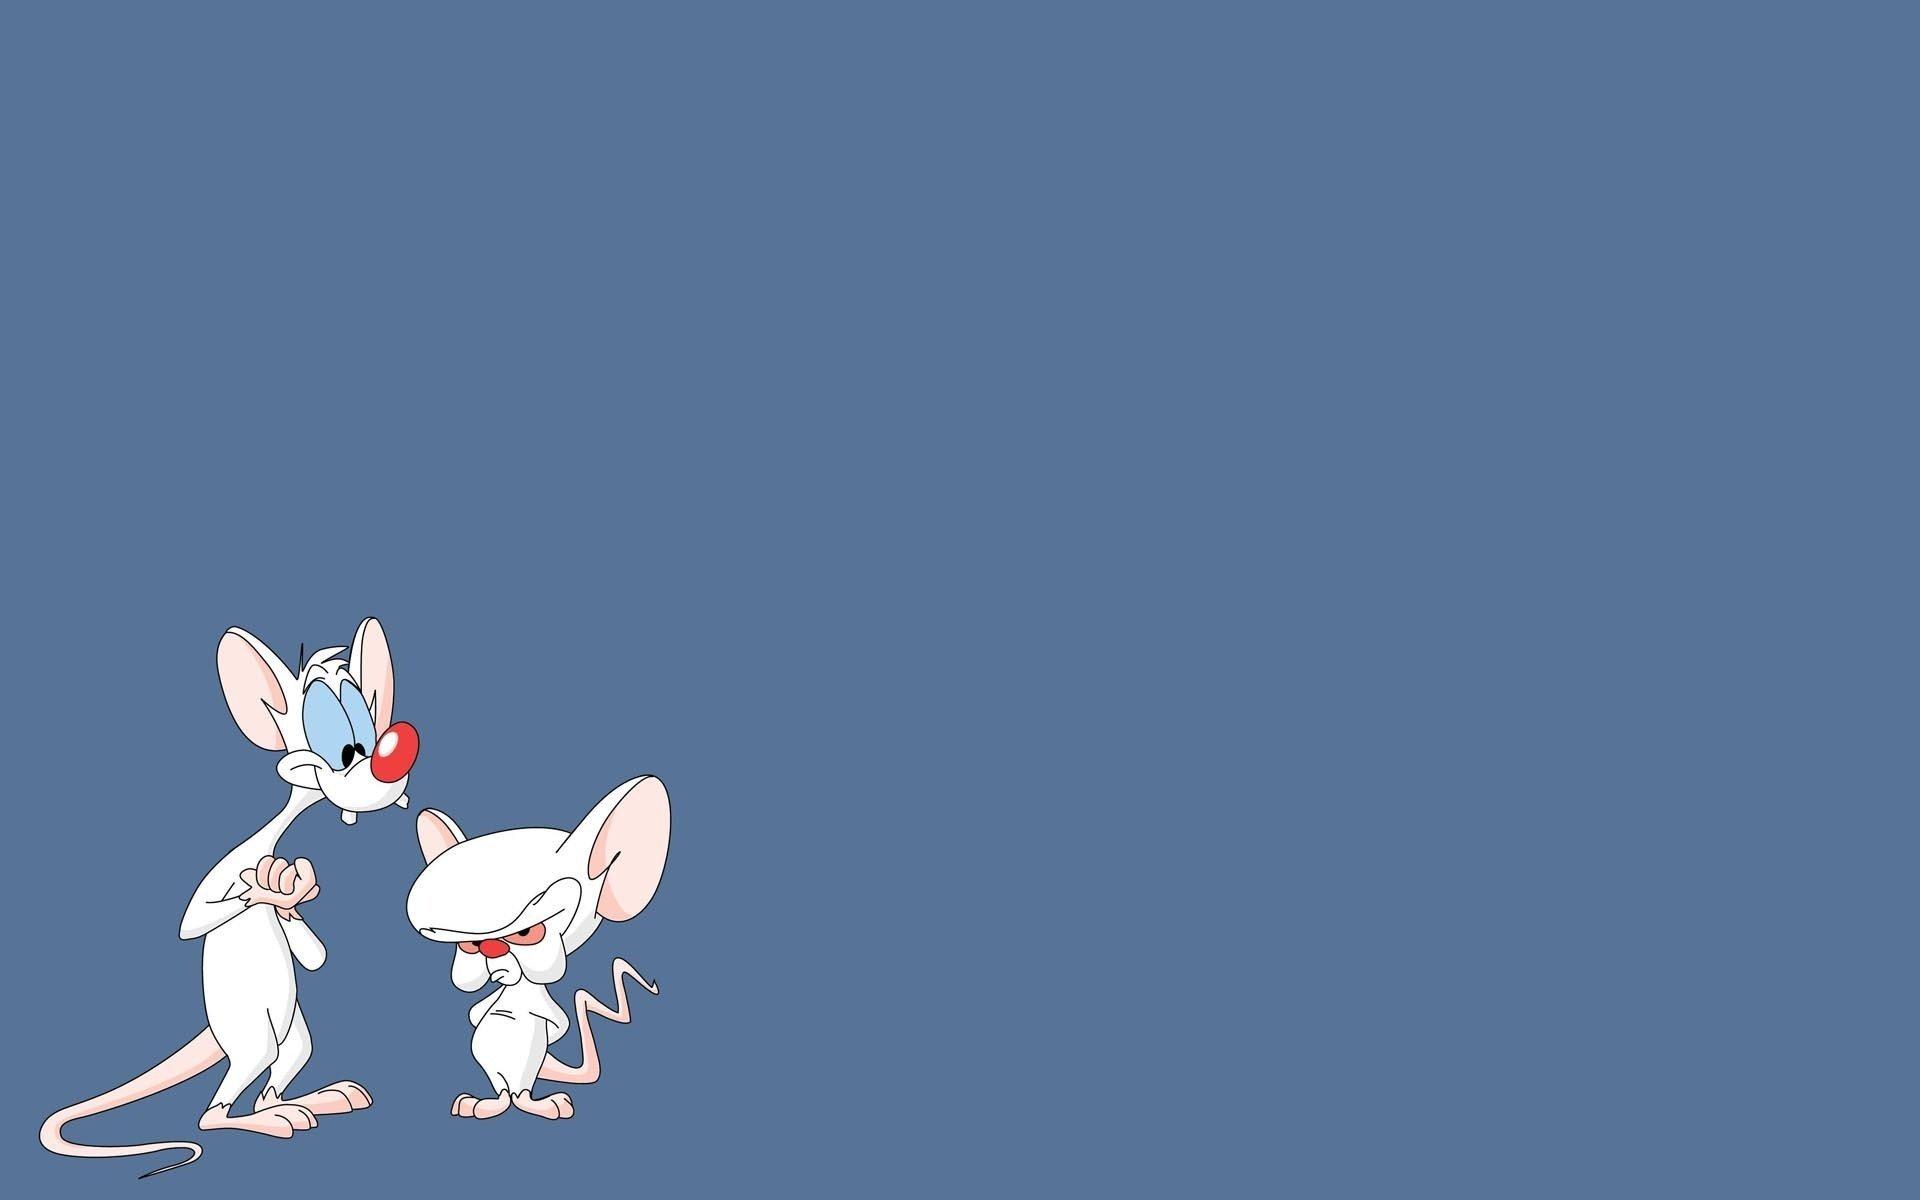 Best 57+ Pinky and the Brain Wallpapers on HipWallpapers